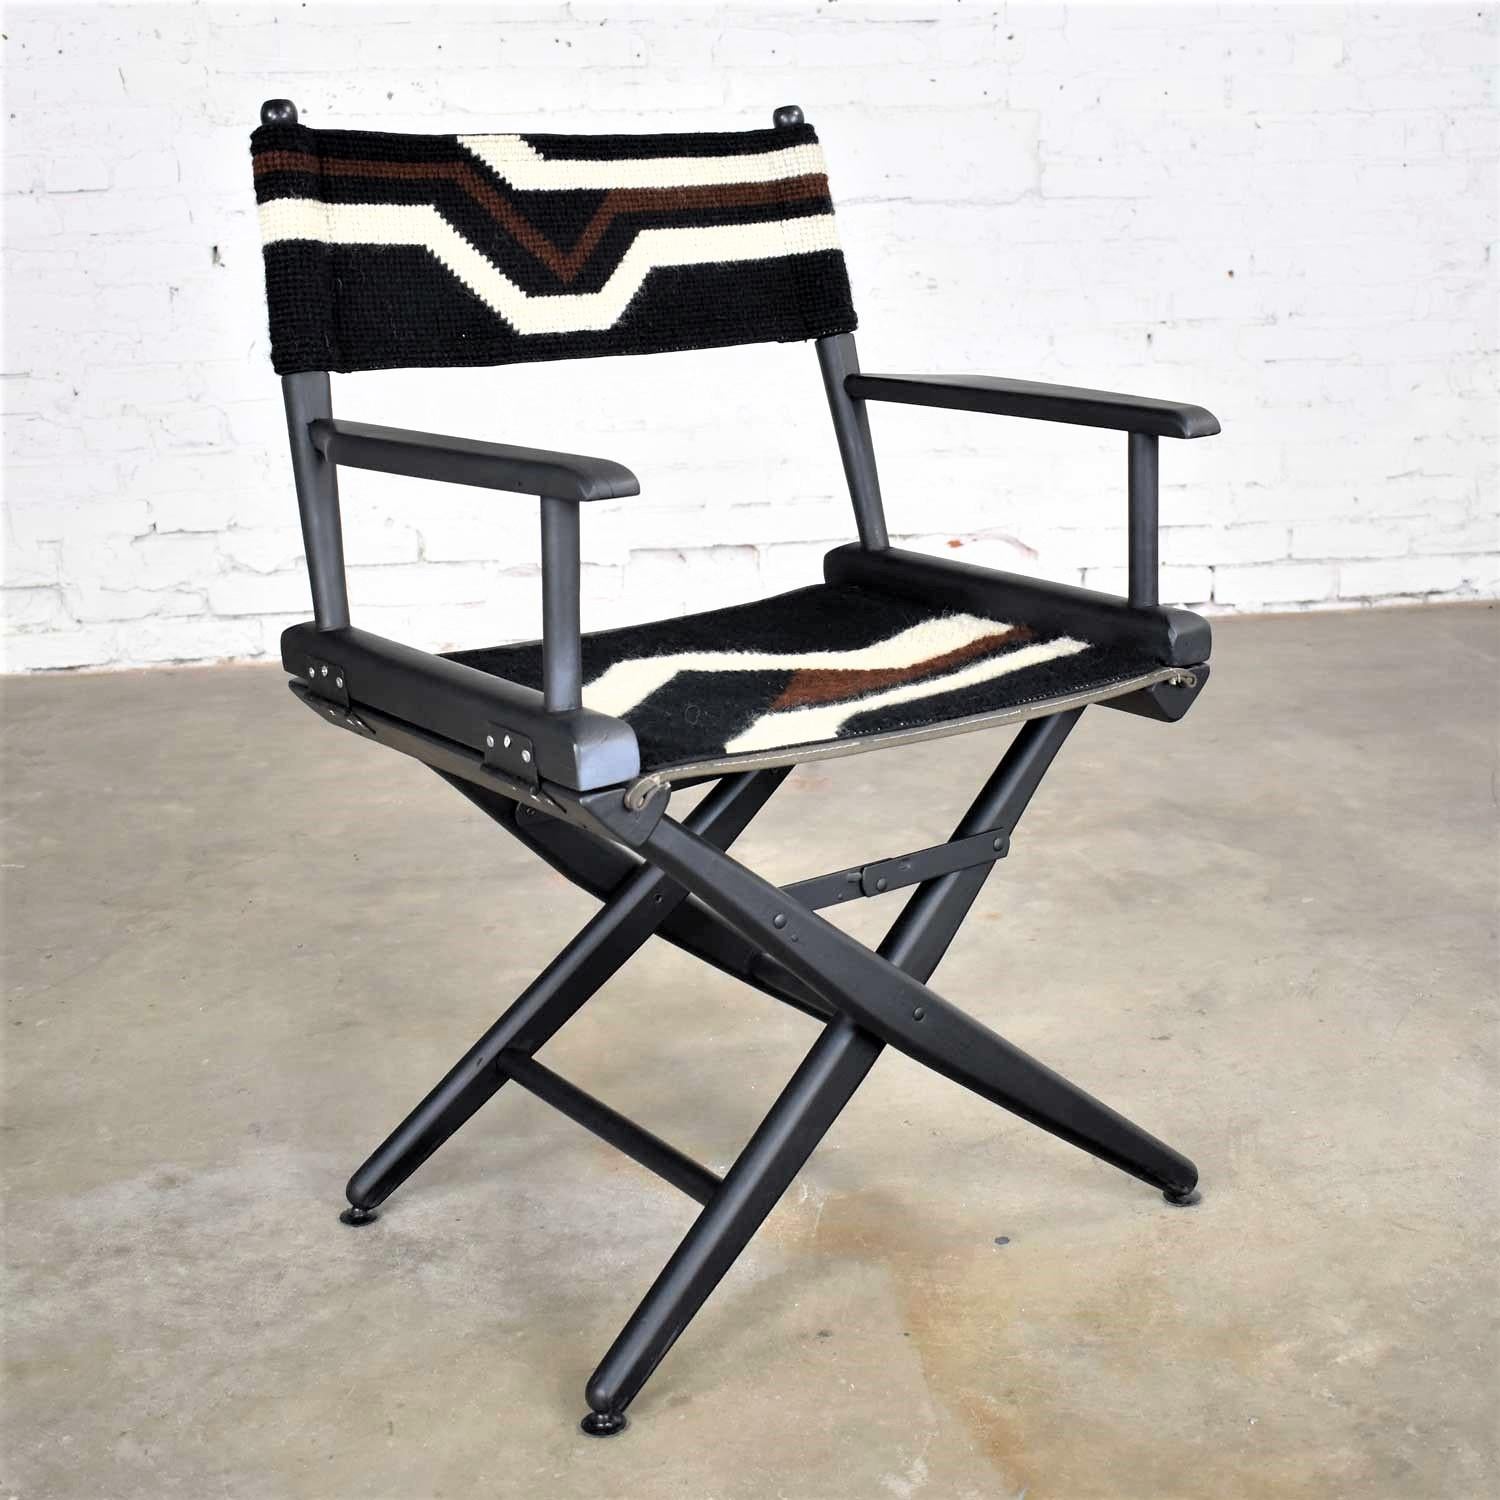 Awesome black wood folding director’s chair with a handmade black, brown, and white geometric pattern needlepoint sling seat and back. It is in wonderful vintage condition. The wood has a new coat of black paint. The needlepoint is all intact and